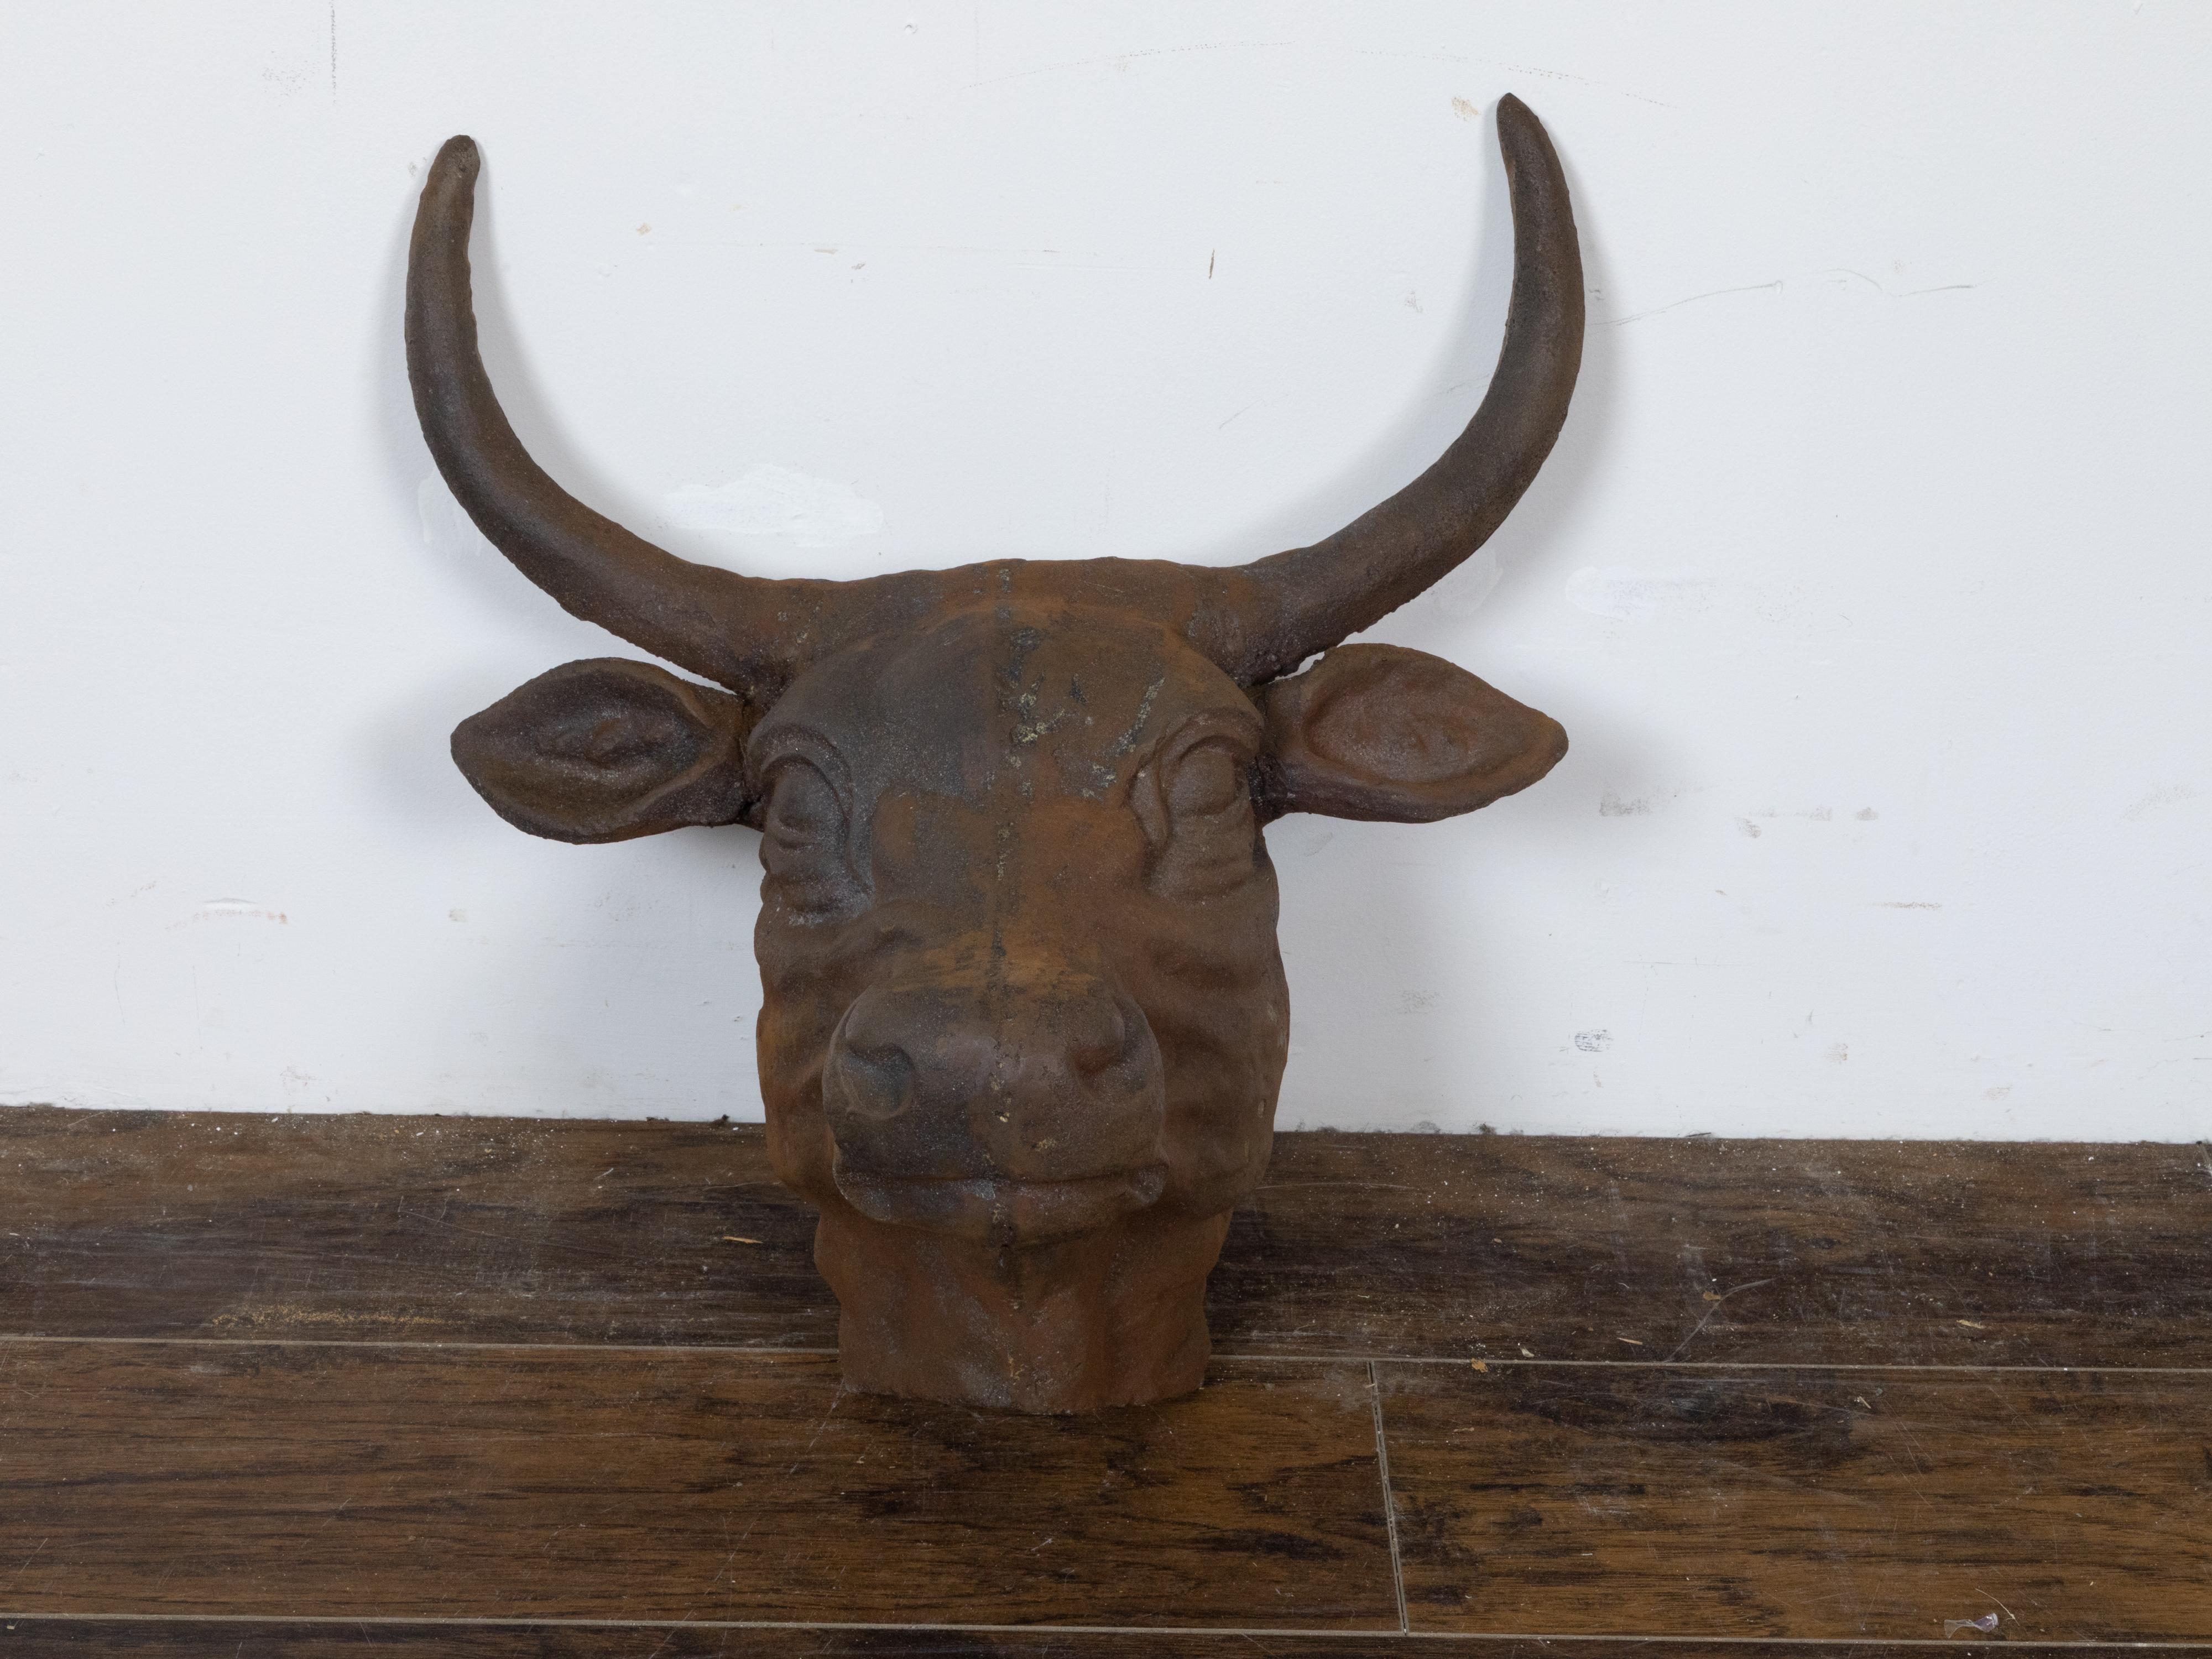 This English cast iron bull wall hanging sculpture, dating back to circa 1930-1940, presenting large antlers and a rustic, rusty patina. The sculpture embodies the essence of English artistry from this period, combining bold design and skilled